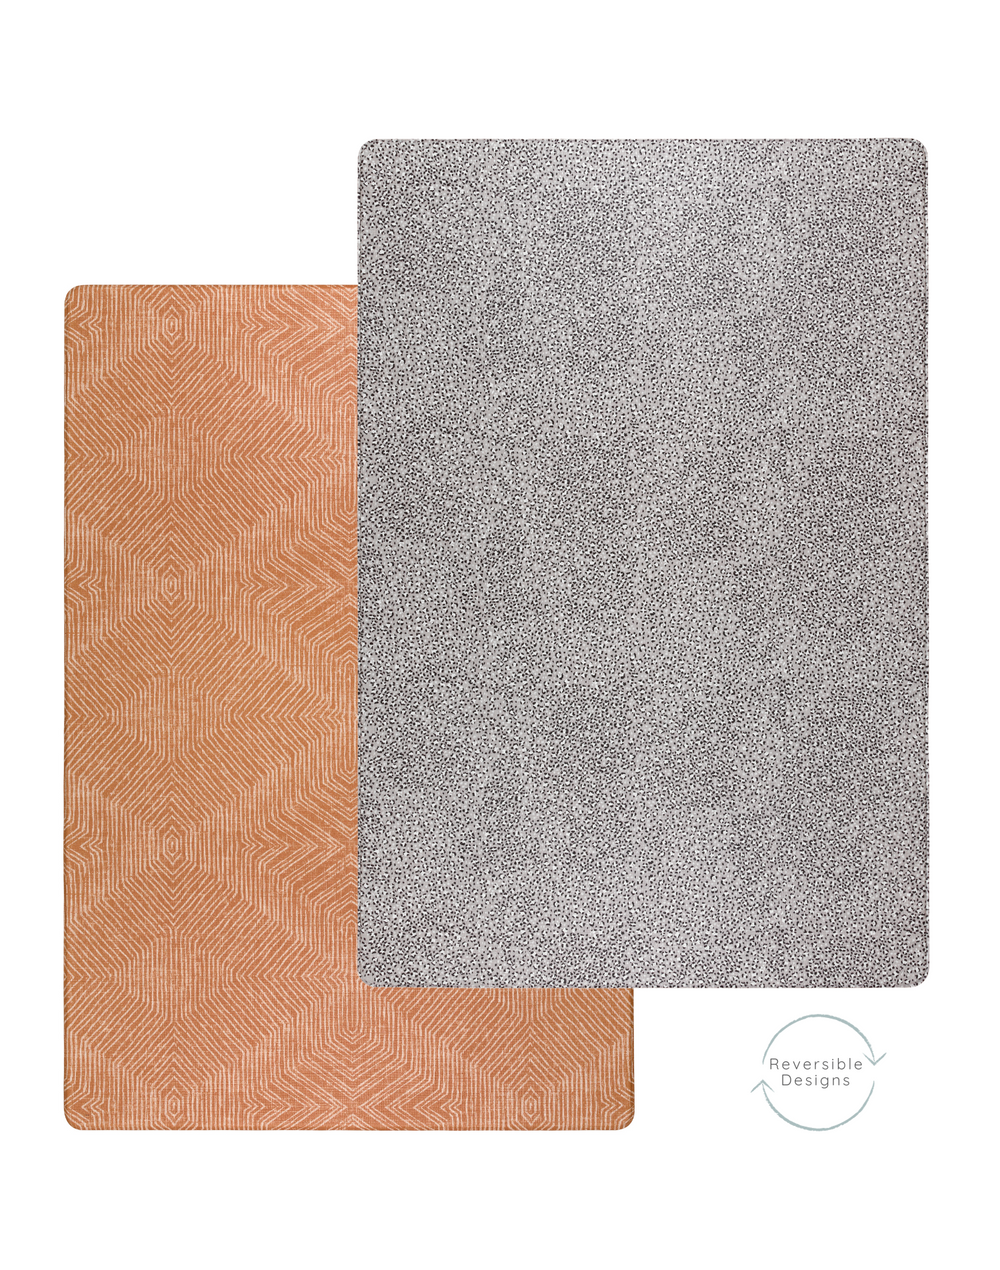 Double sided play mat by totter and tumble with grey leopard design and orange play mat design on the reverse created with a gentle textile motif so it looks like an area rug in the home practical for everyone